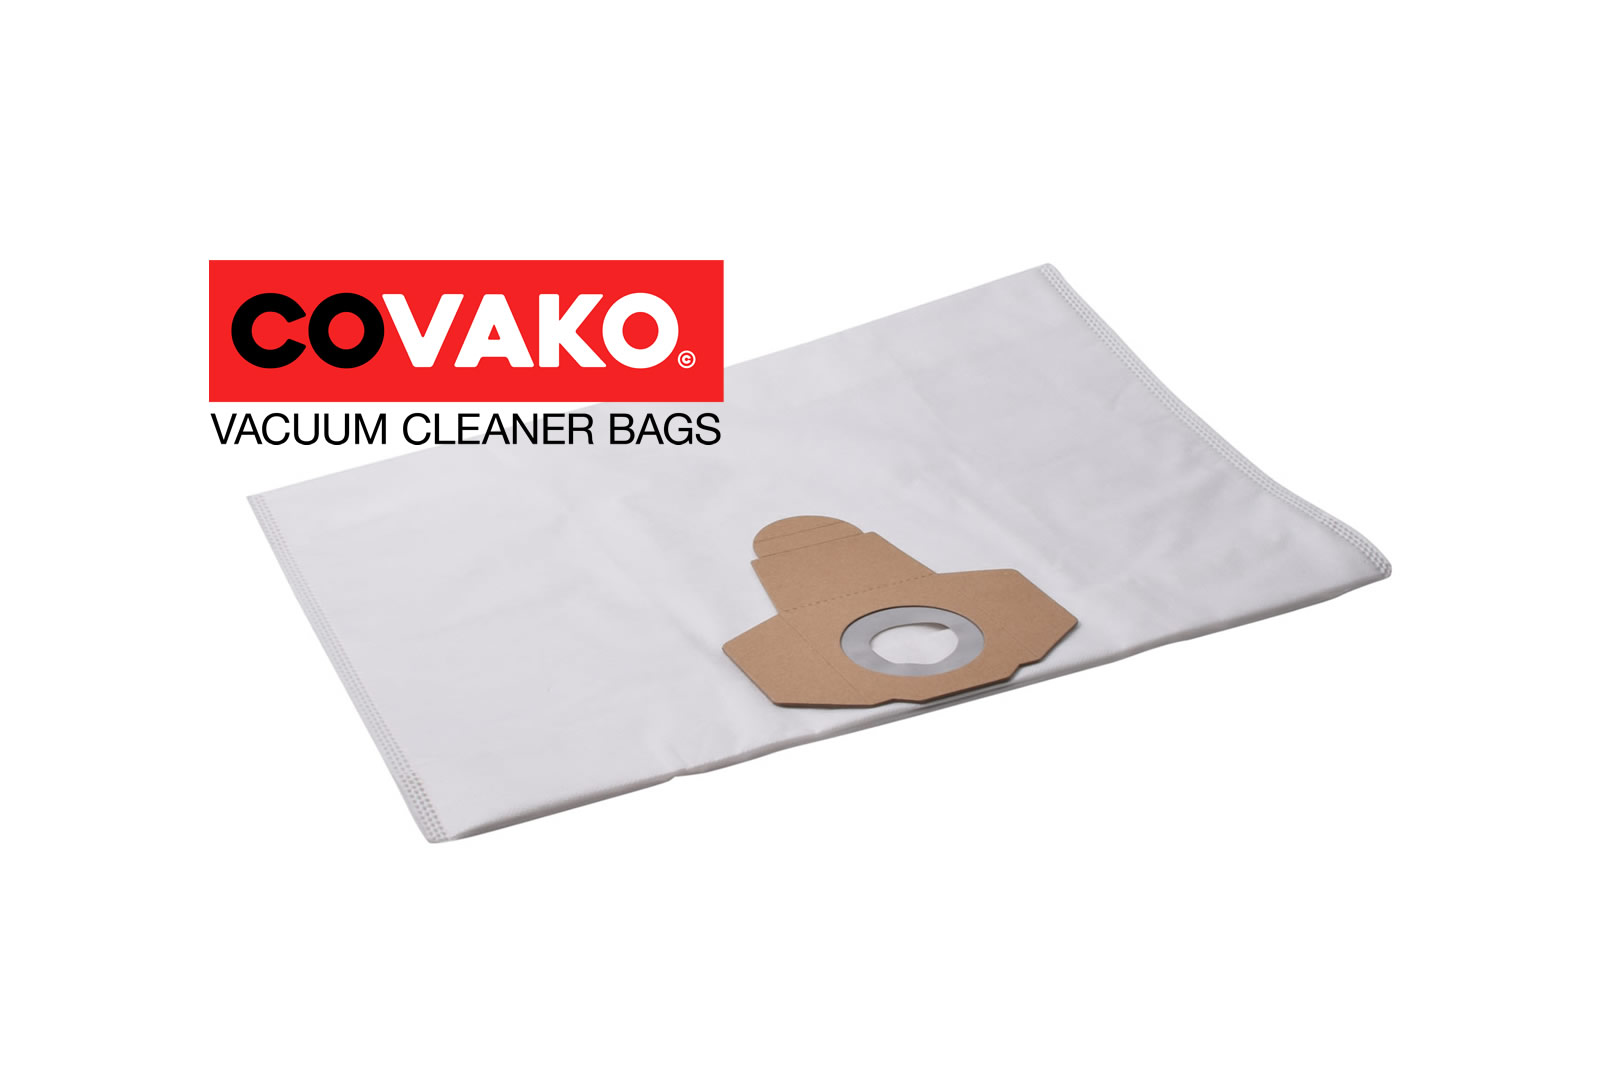 Einhell RT-VC 1525 SA / Synthesis - Einhell vacuum cleaner bags